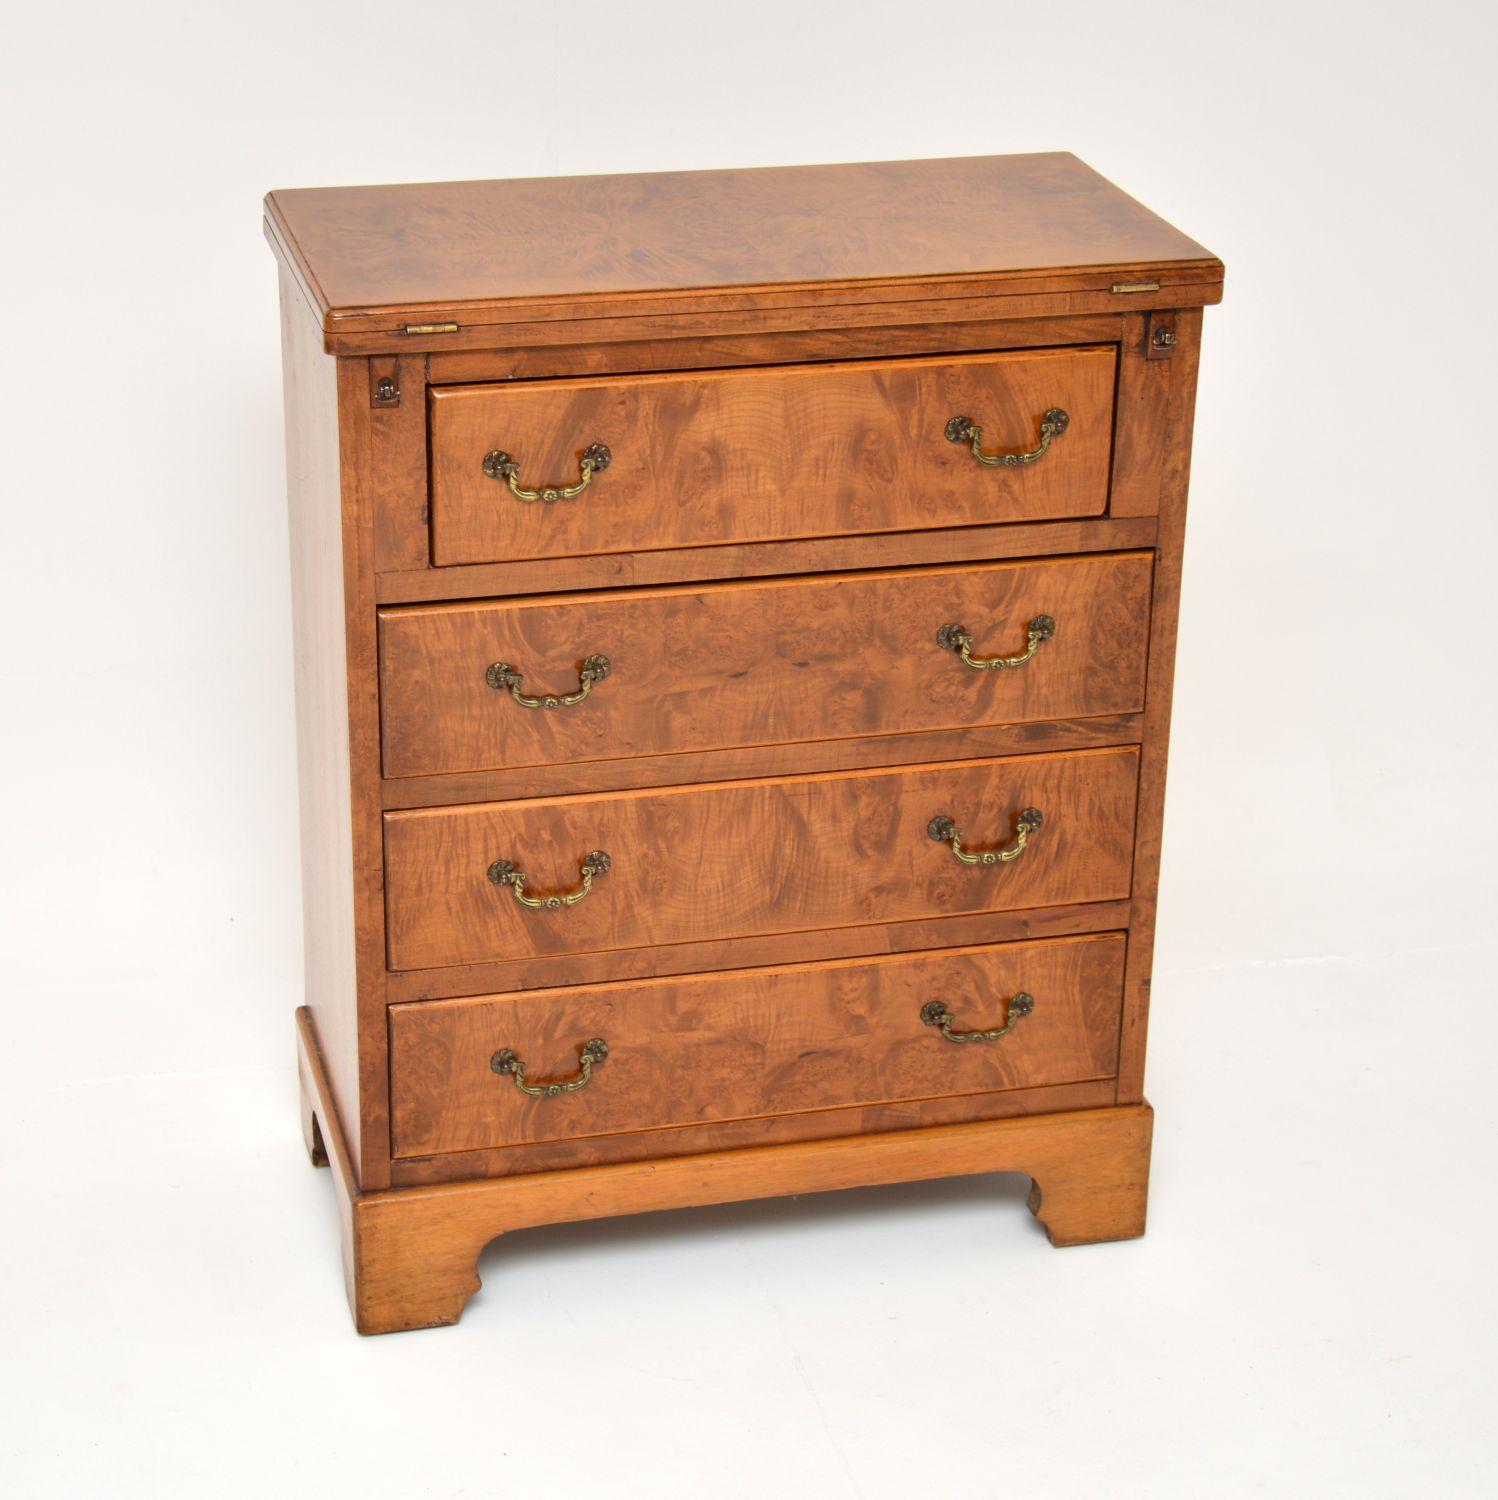 A smart and useful small antique Georgian style burr walnut bachelors chest of drawers. This was made in England, it dates from around the 1930’s.

It is a lovely, compact size and is of excellent quality. There is lots of storage space inside the